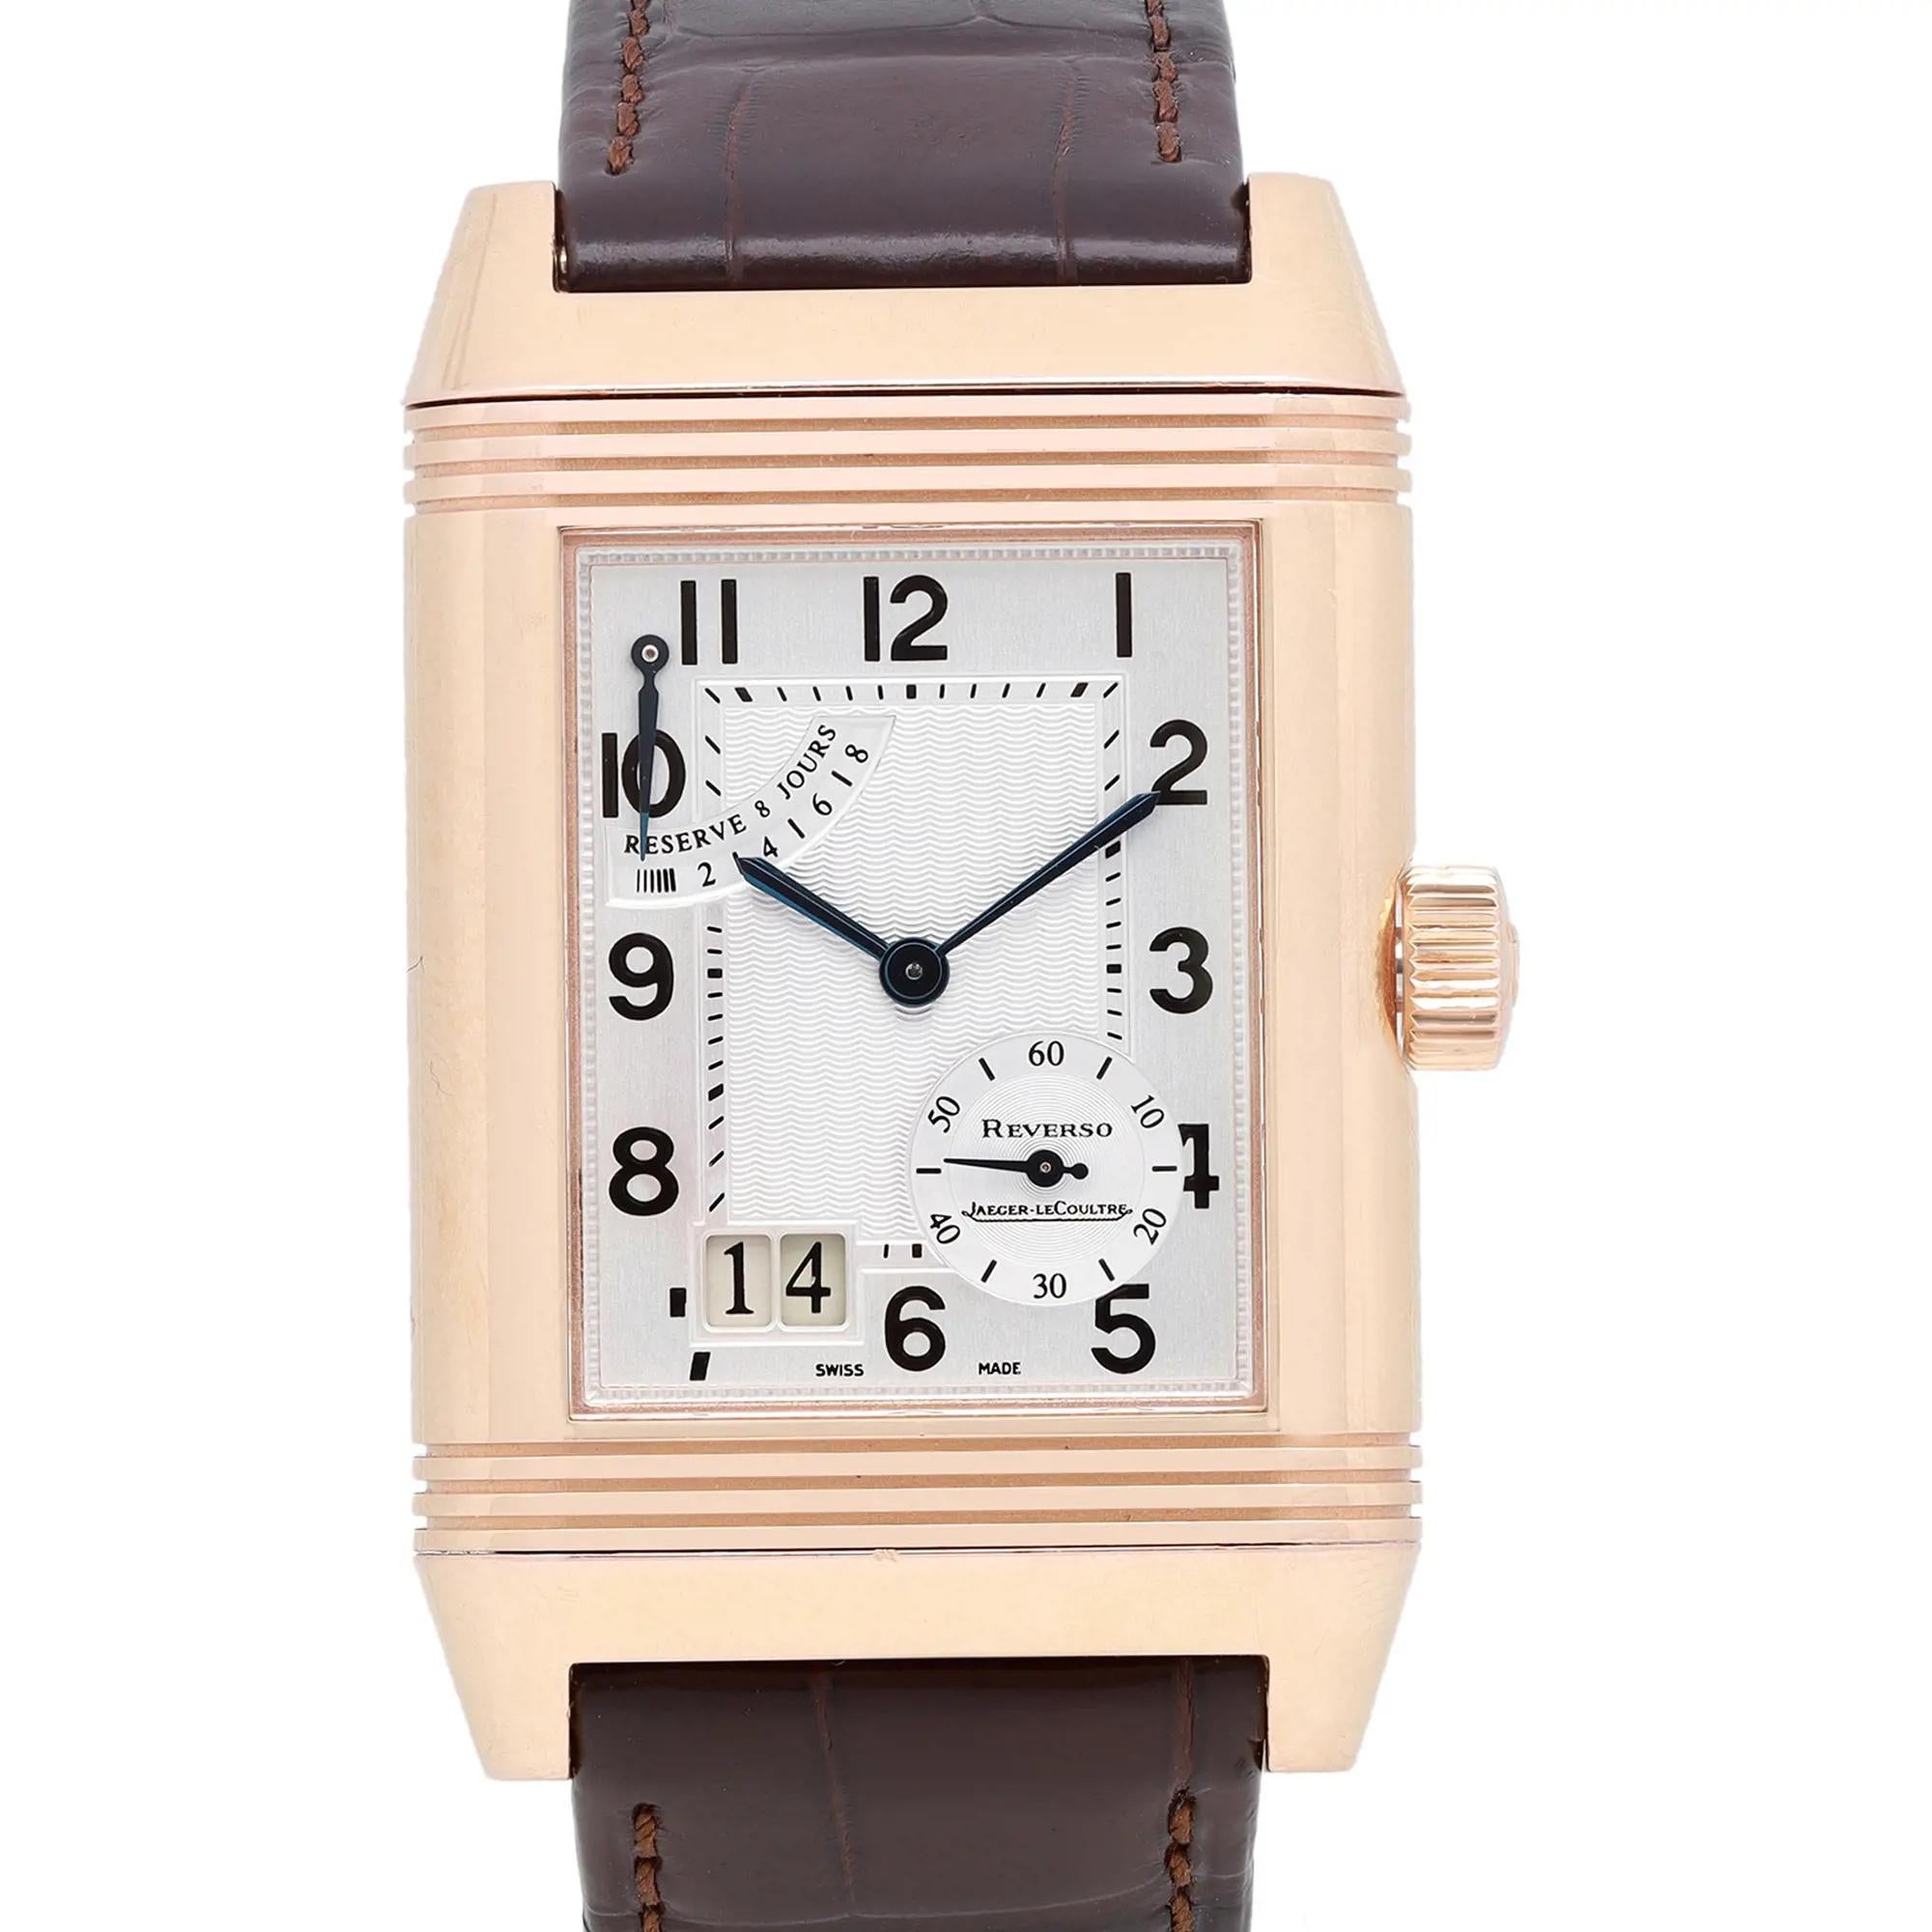 Pre-Owned. Unworn band. No original box and papers are included. Minor scratches on the case and crown.

 Brand: Jaeger-LeCoultre  Type: Wristwatch  Department: Men  Model Number: Q3002401  Country/Region of Manufacture: Switzerland  Style: Luxury 